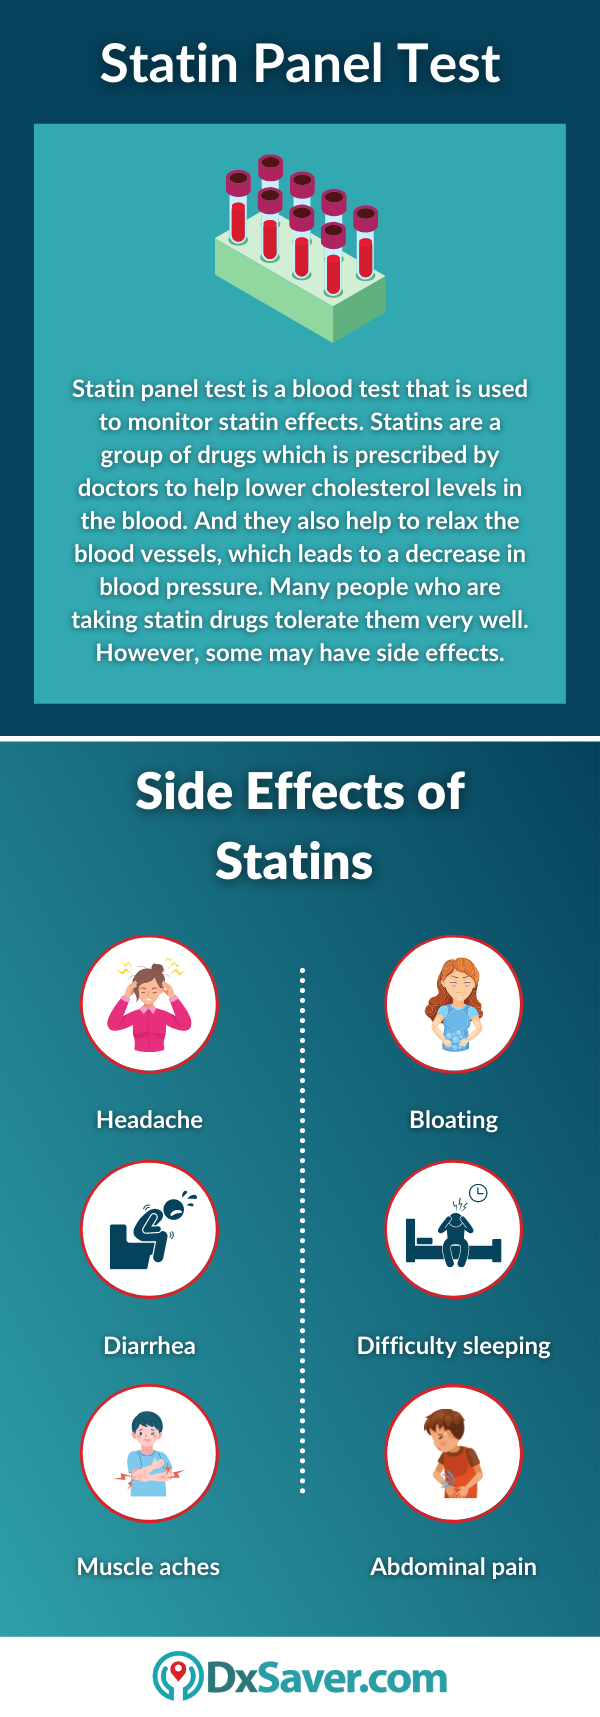 Statin Panel Test and Side Effects of Statin